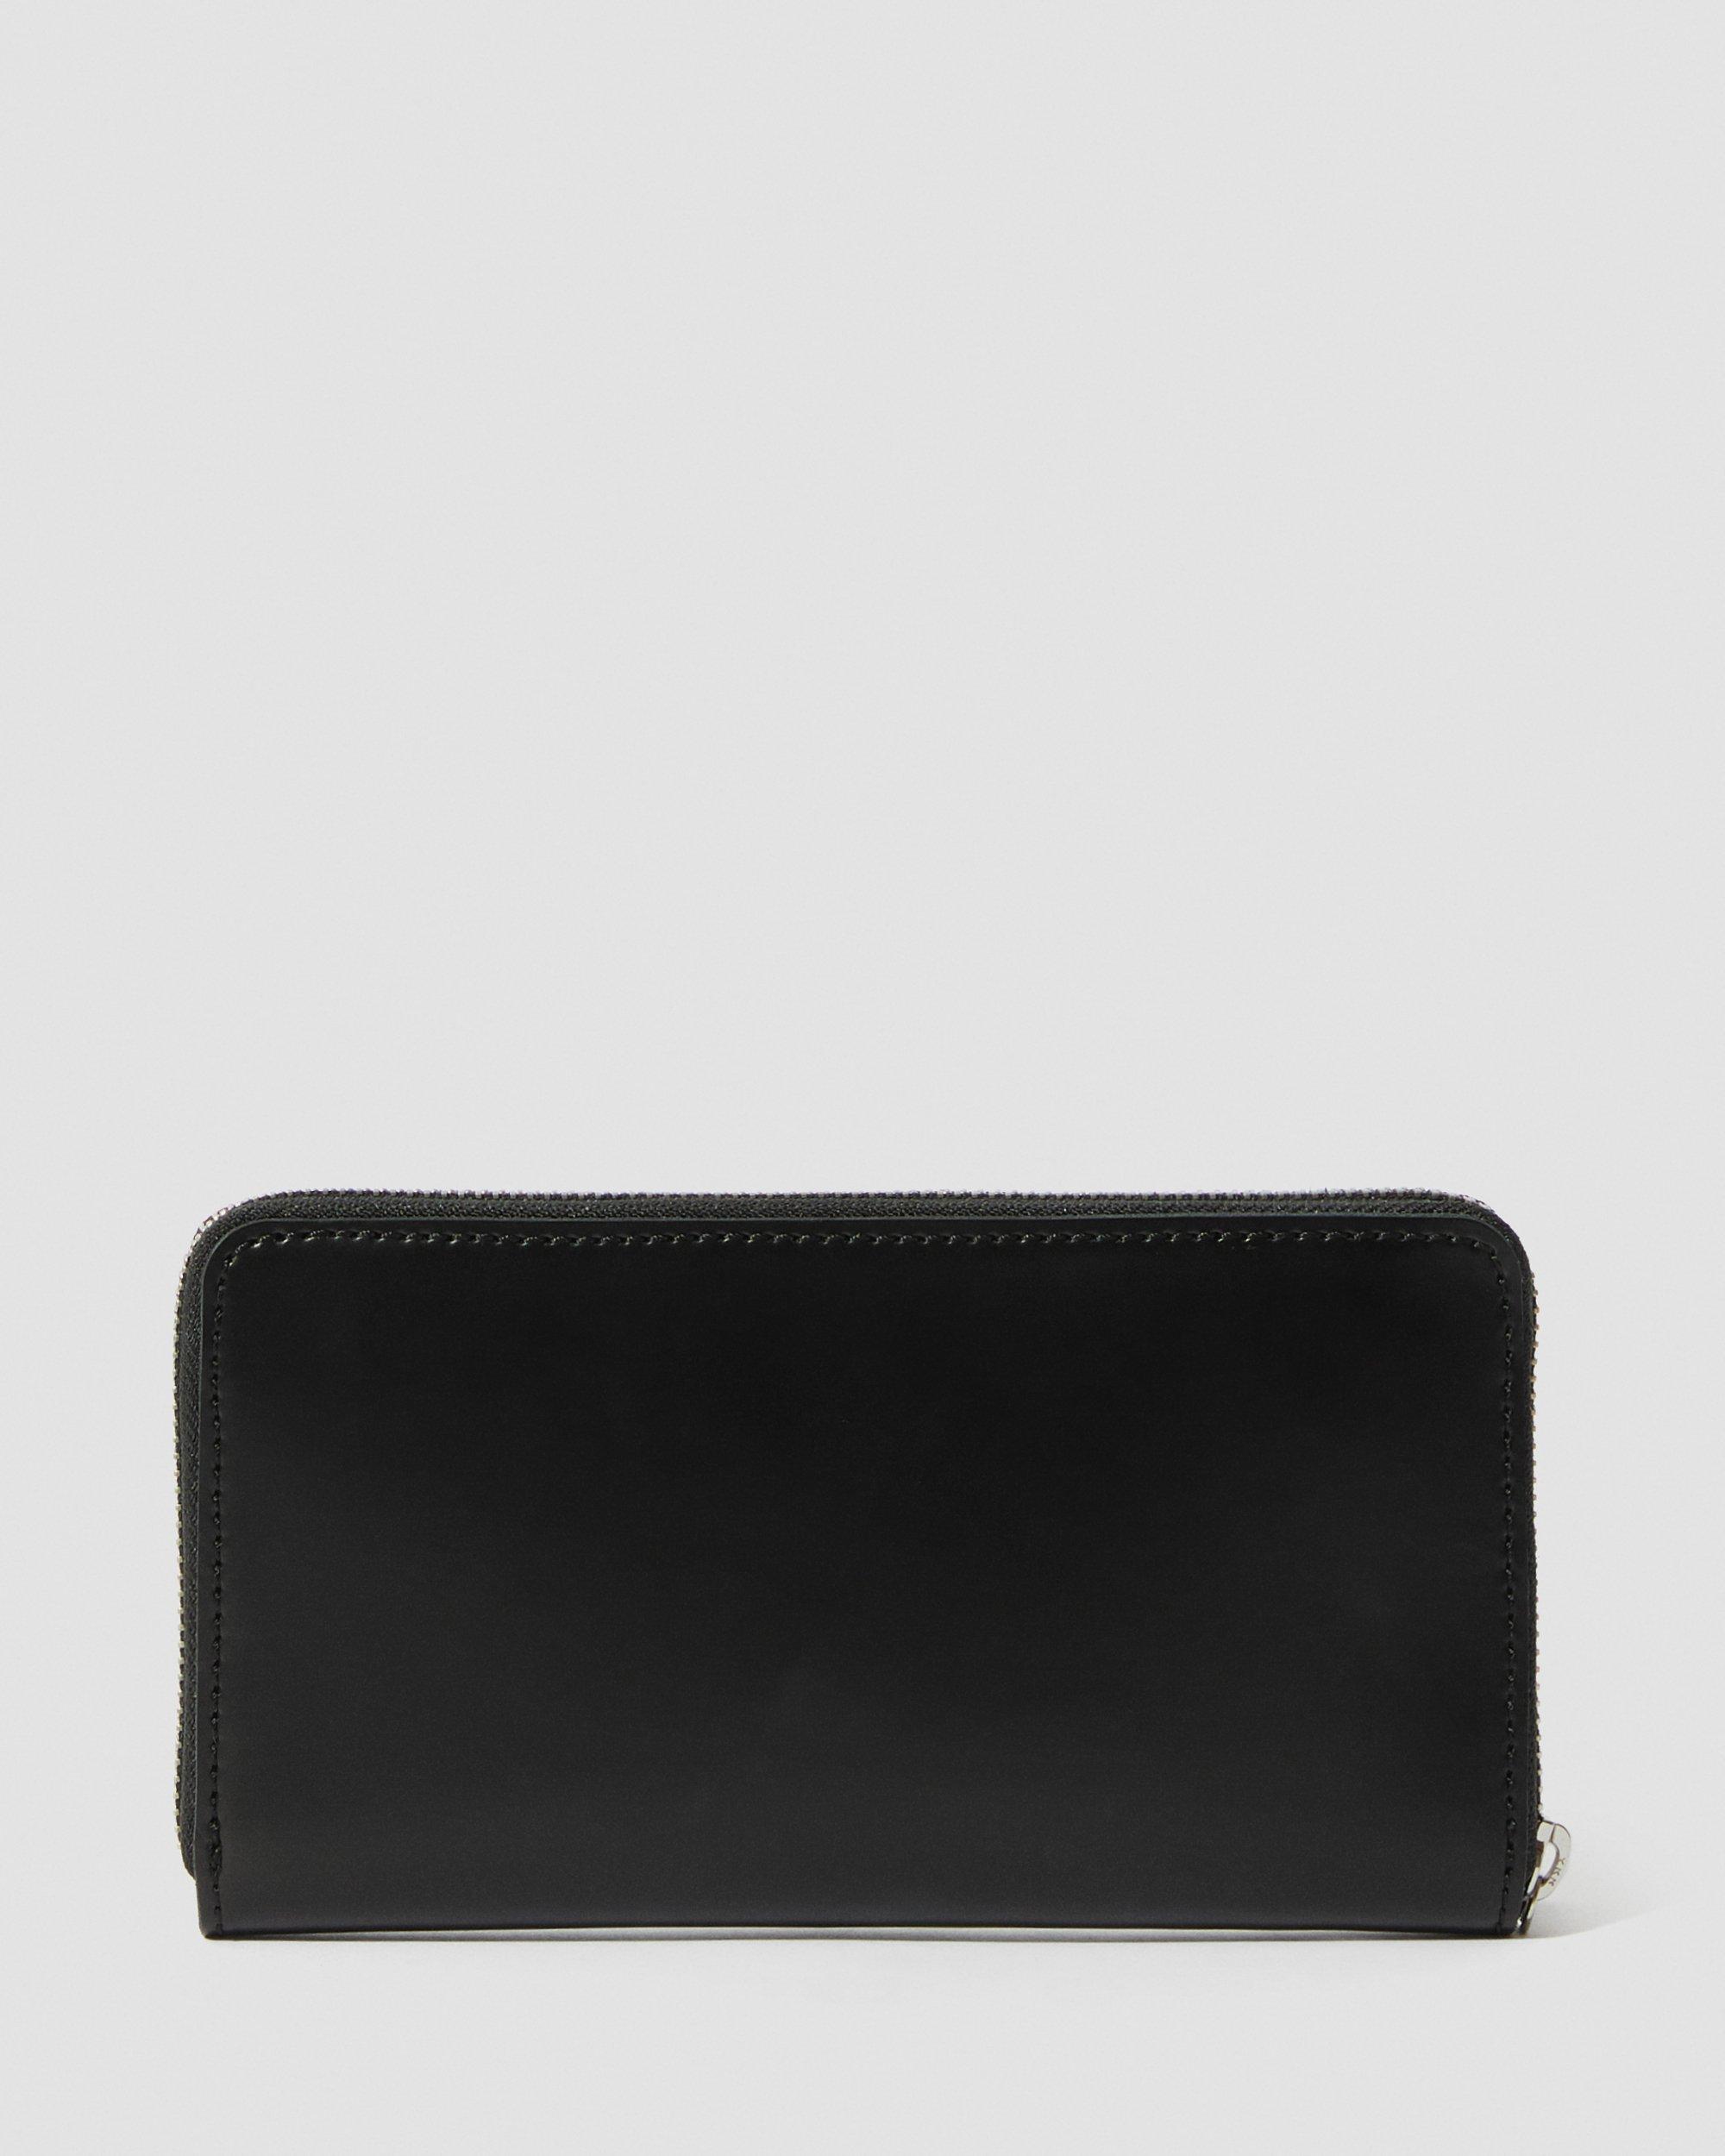 LEATHER ZIP PURSE in Black | Dr. Martens